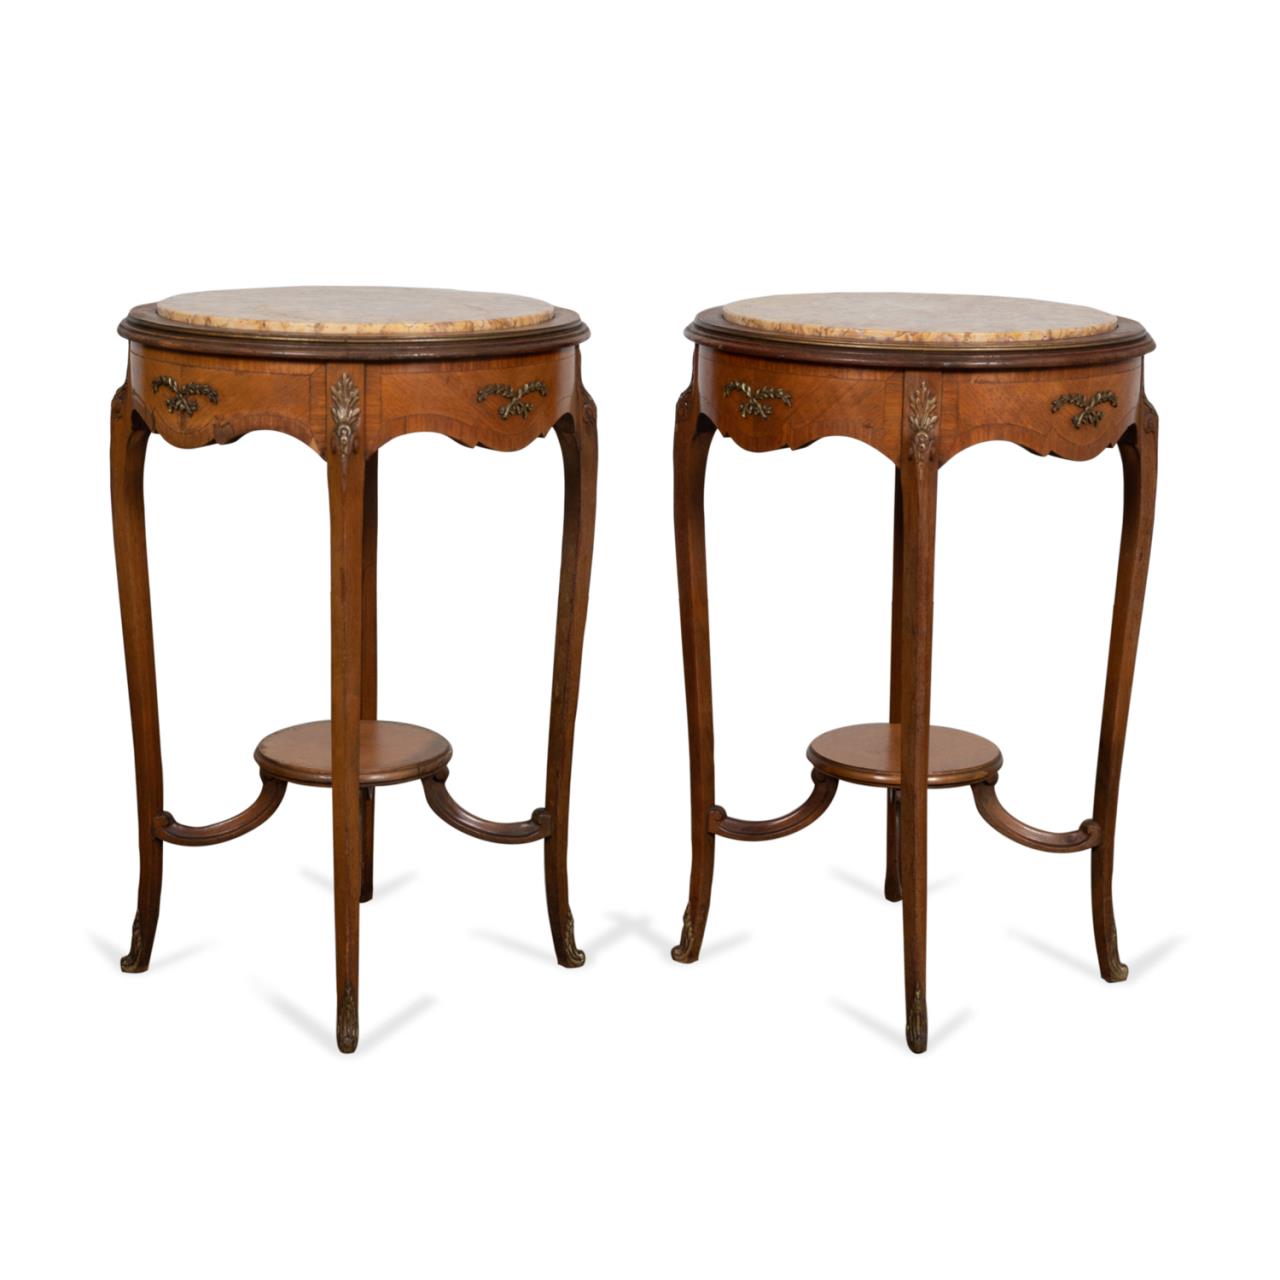 PAIR FRENCH LOUIS XV STYLE WALNUT 2c00d4